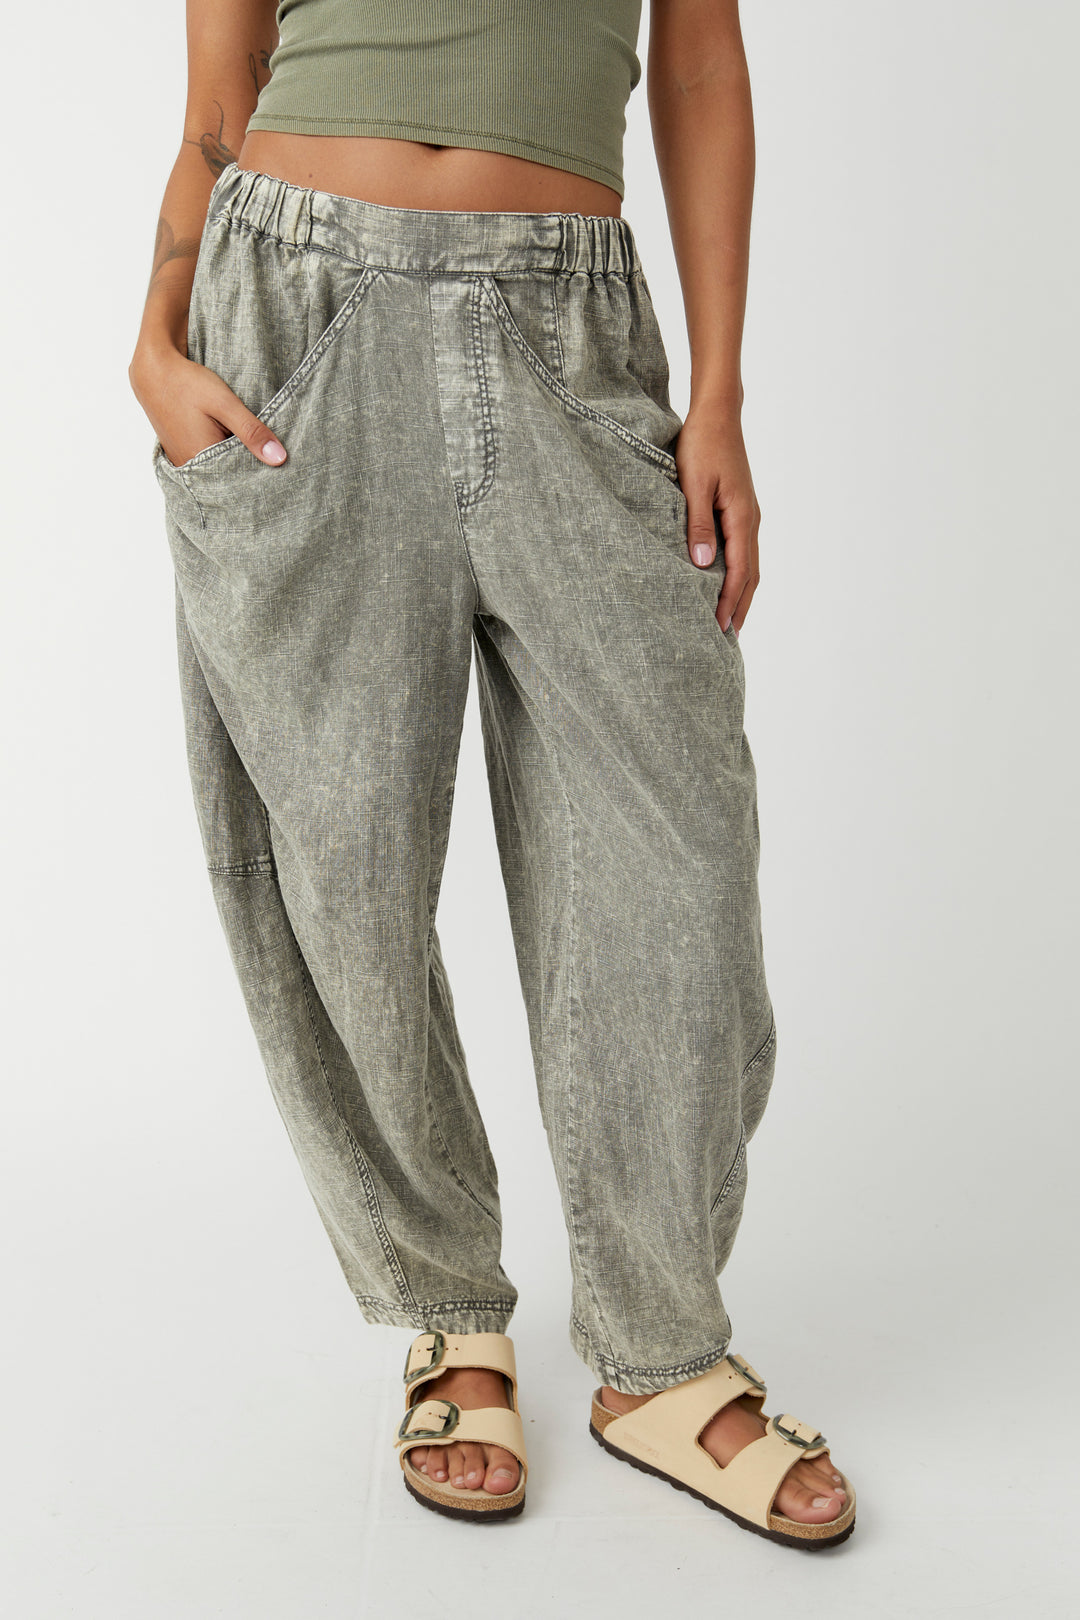 HIGH ROAD PULL ON BARREL PANT-DRIED BASIL - Kingfisher Road - Online Boutique